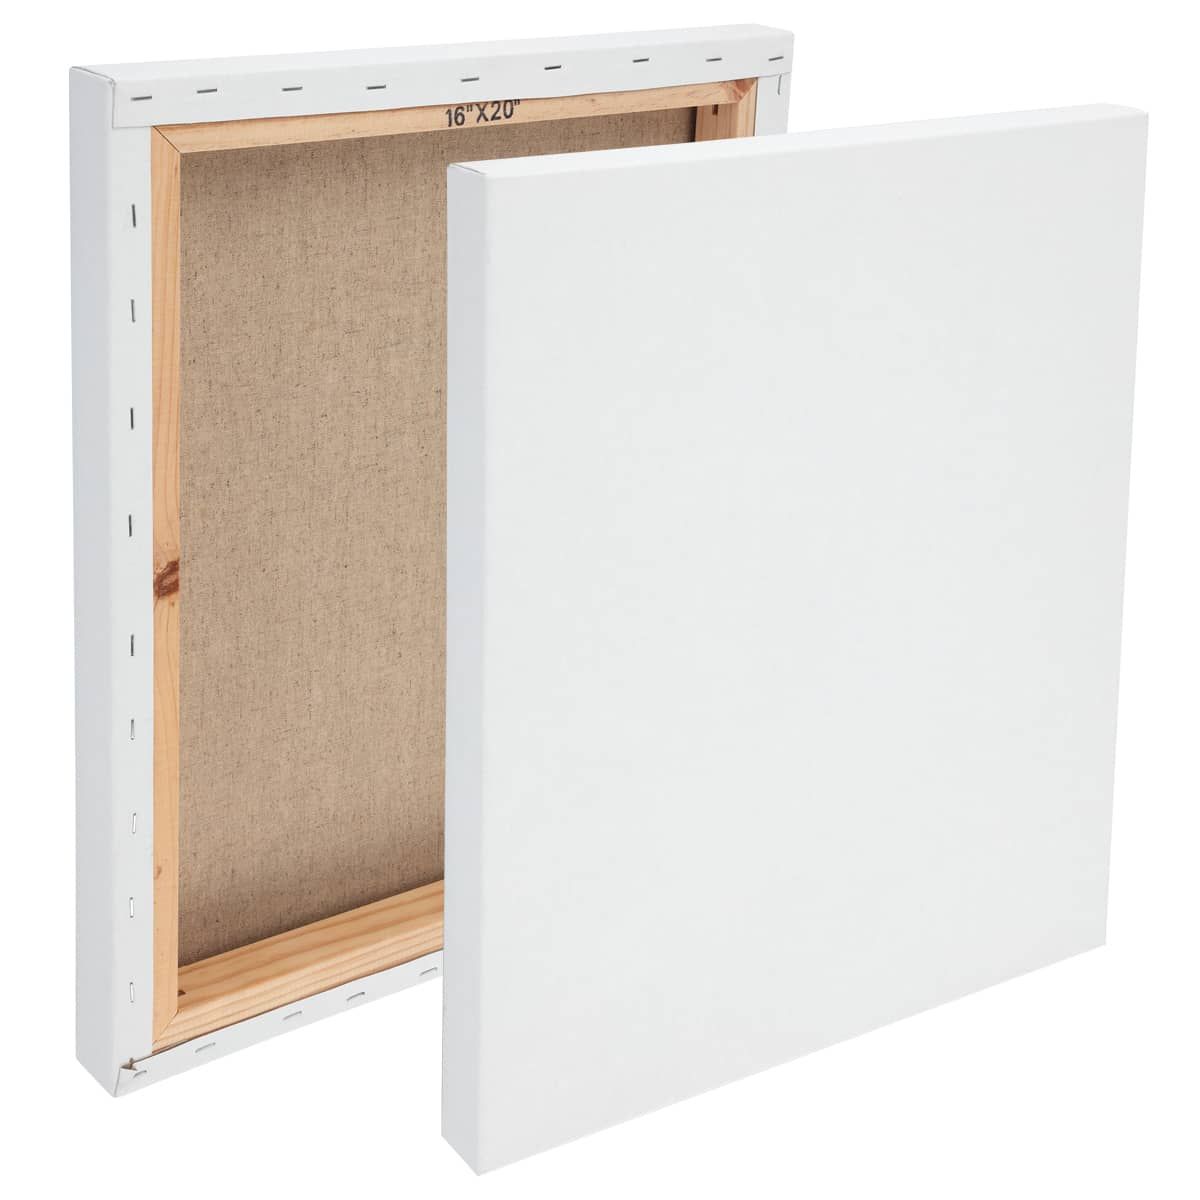 Centurion Universal Acrylic Primed Linen Panels -9x12Canvases for